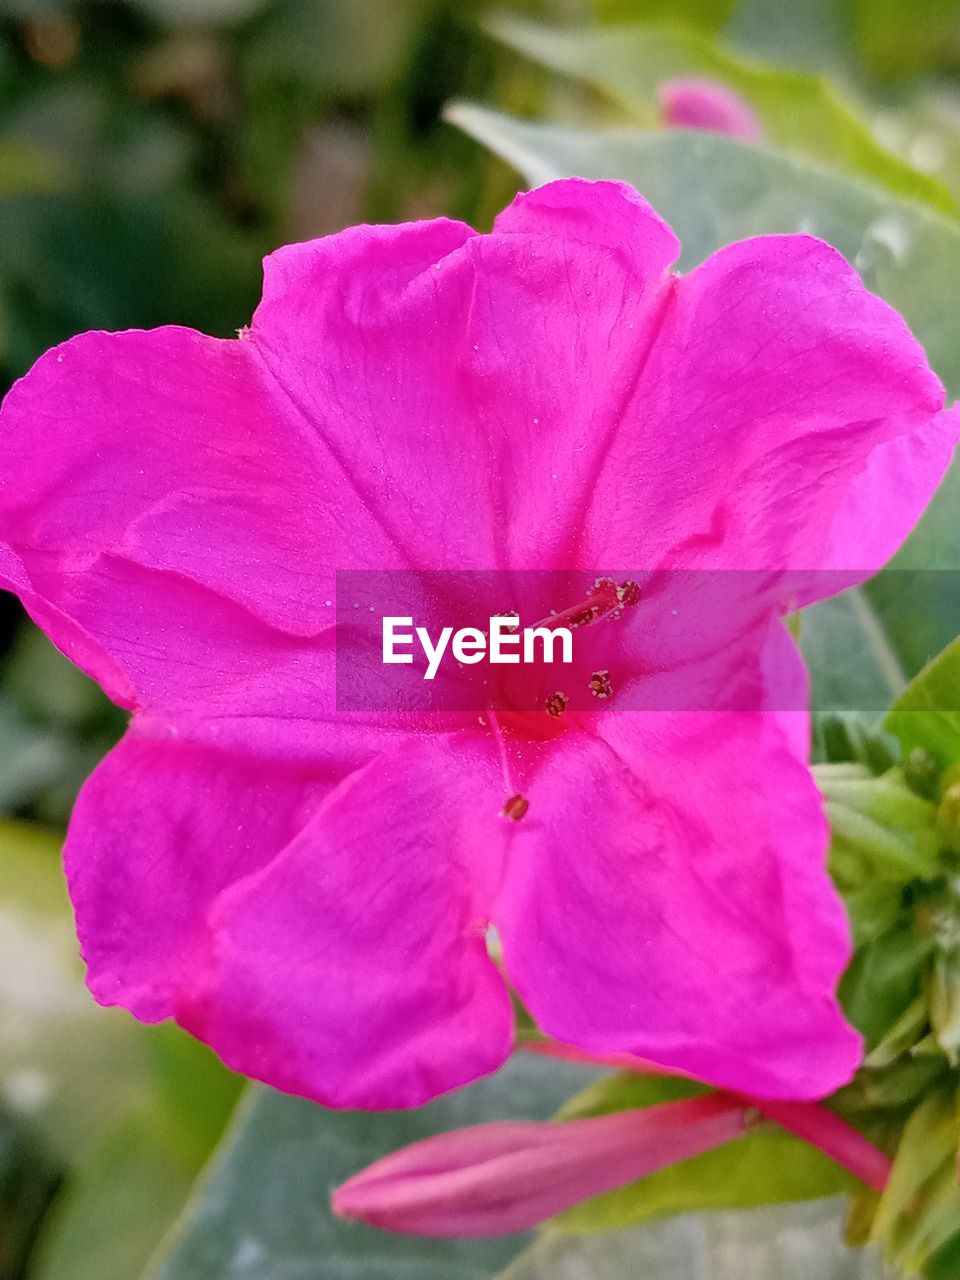 CLOSE-UP OF PINK ROSE FLOWER IN BLOOM